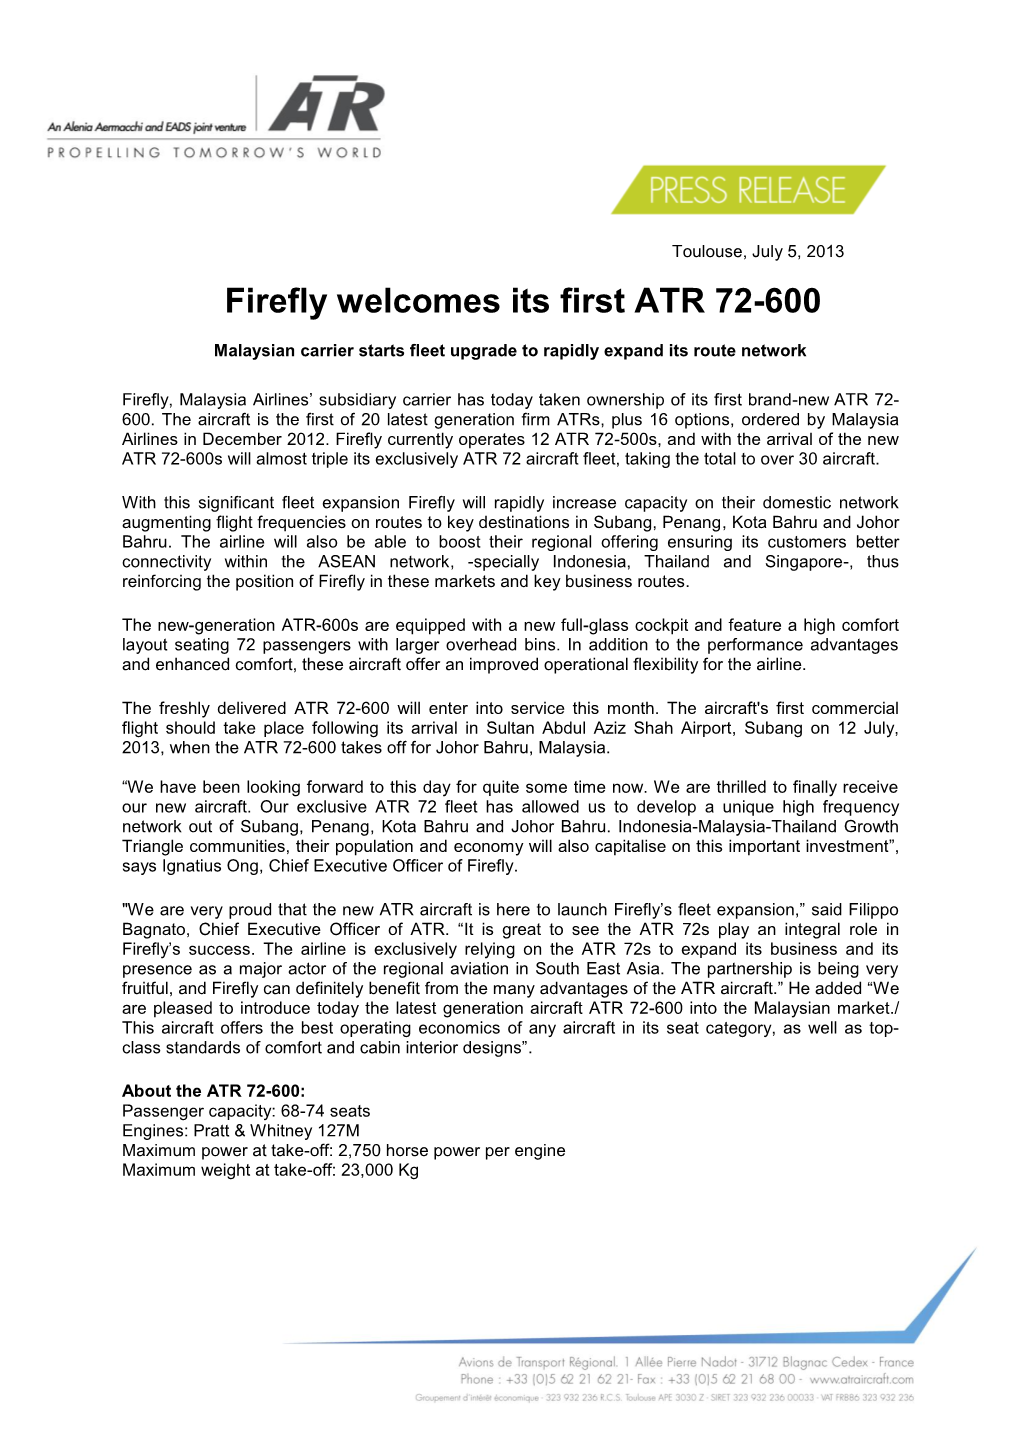 Firefly Welcomes Its First ATR 72-600